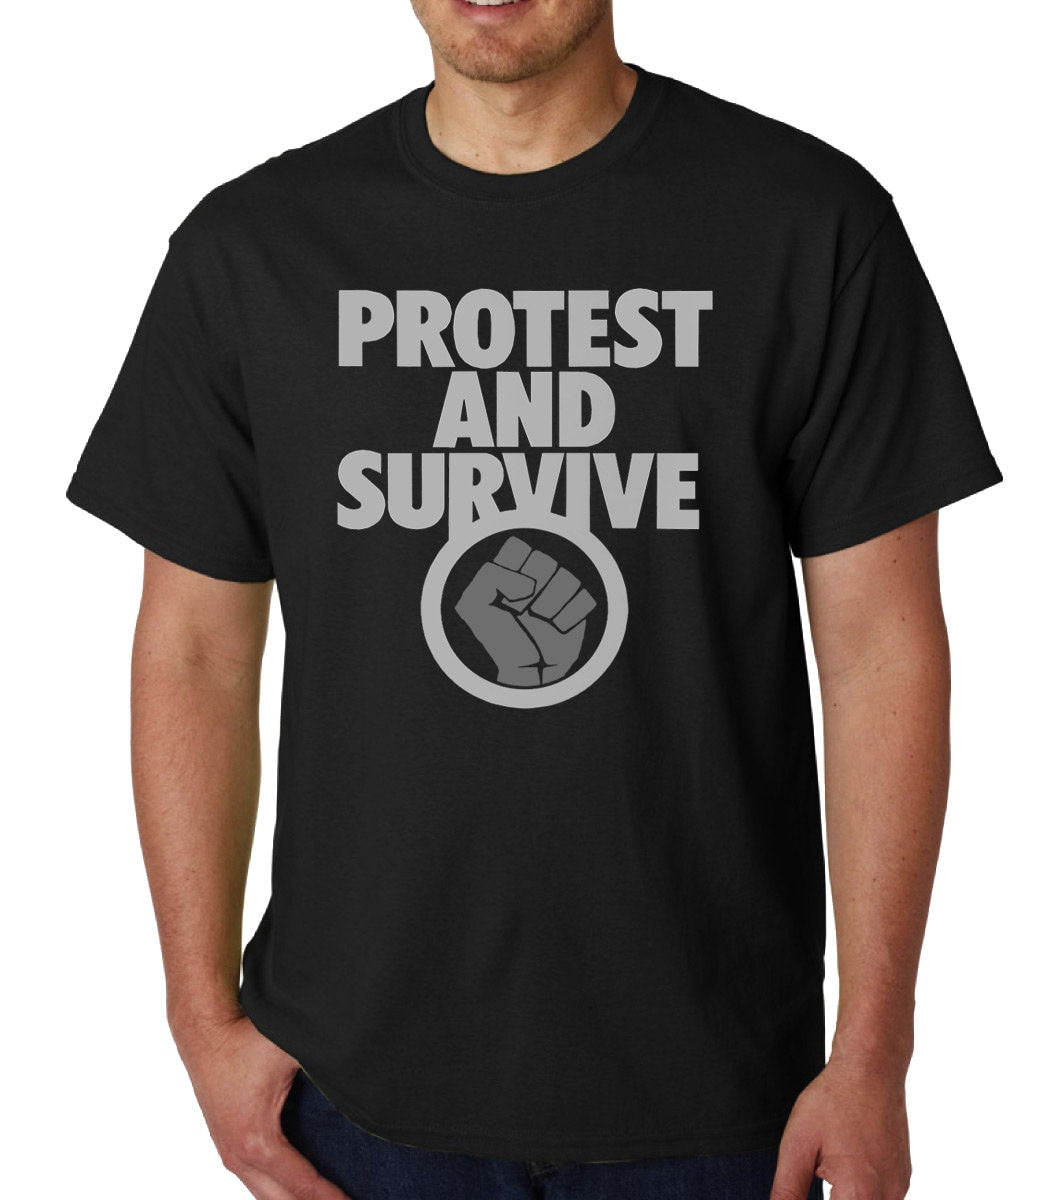 Protest and Survive t-shirt